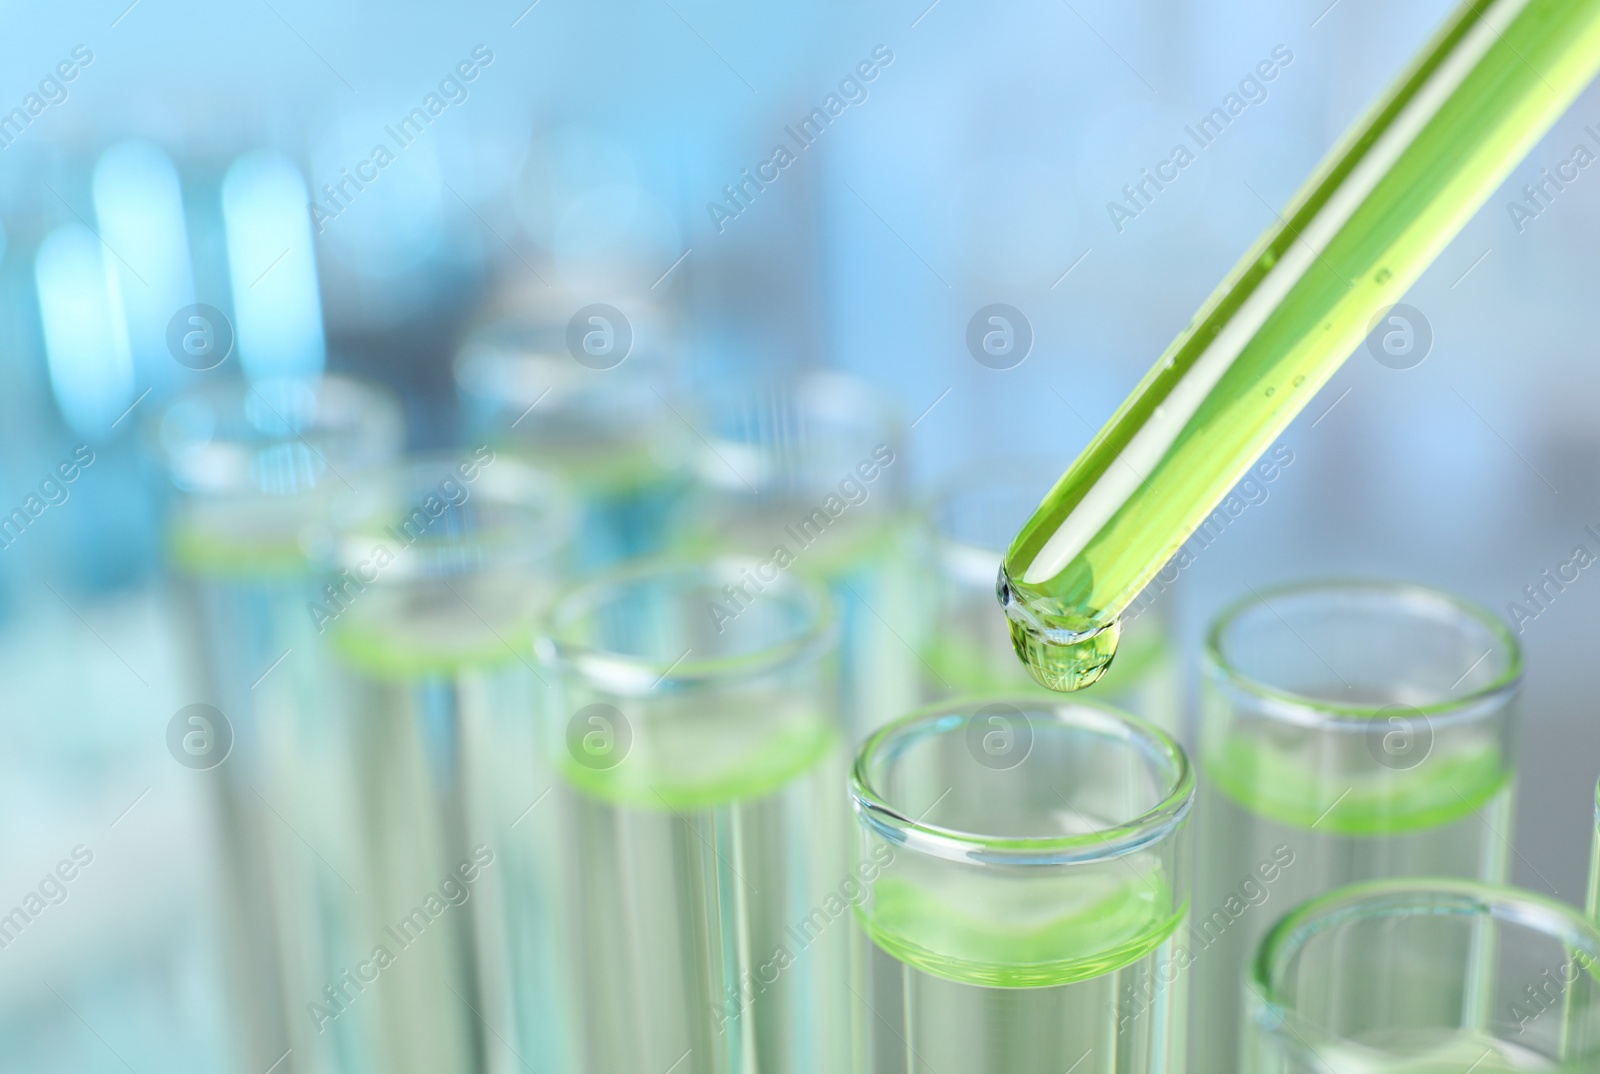 Photo of Dripping liquid into test tube on blurred background, closeup. Laboratory analysis